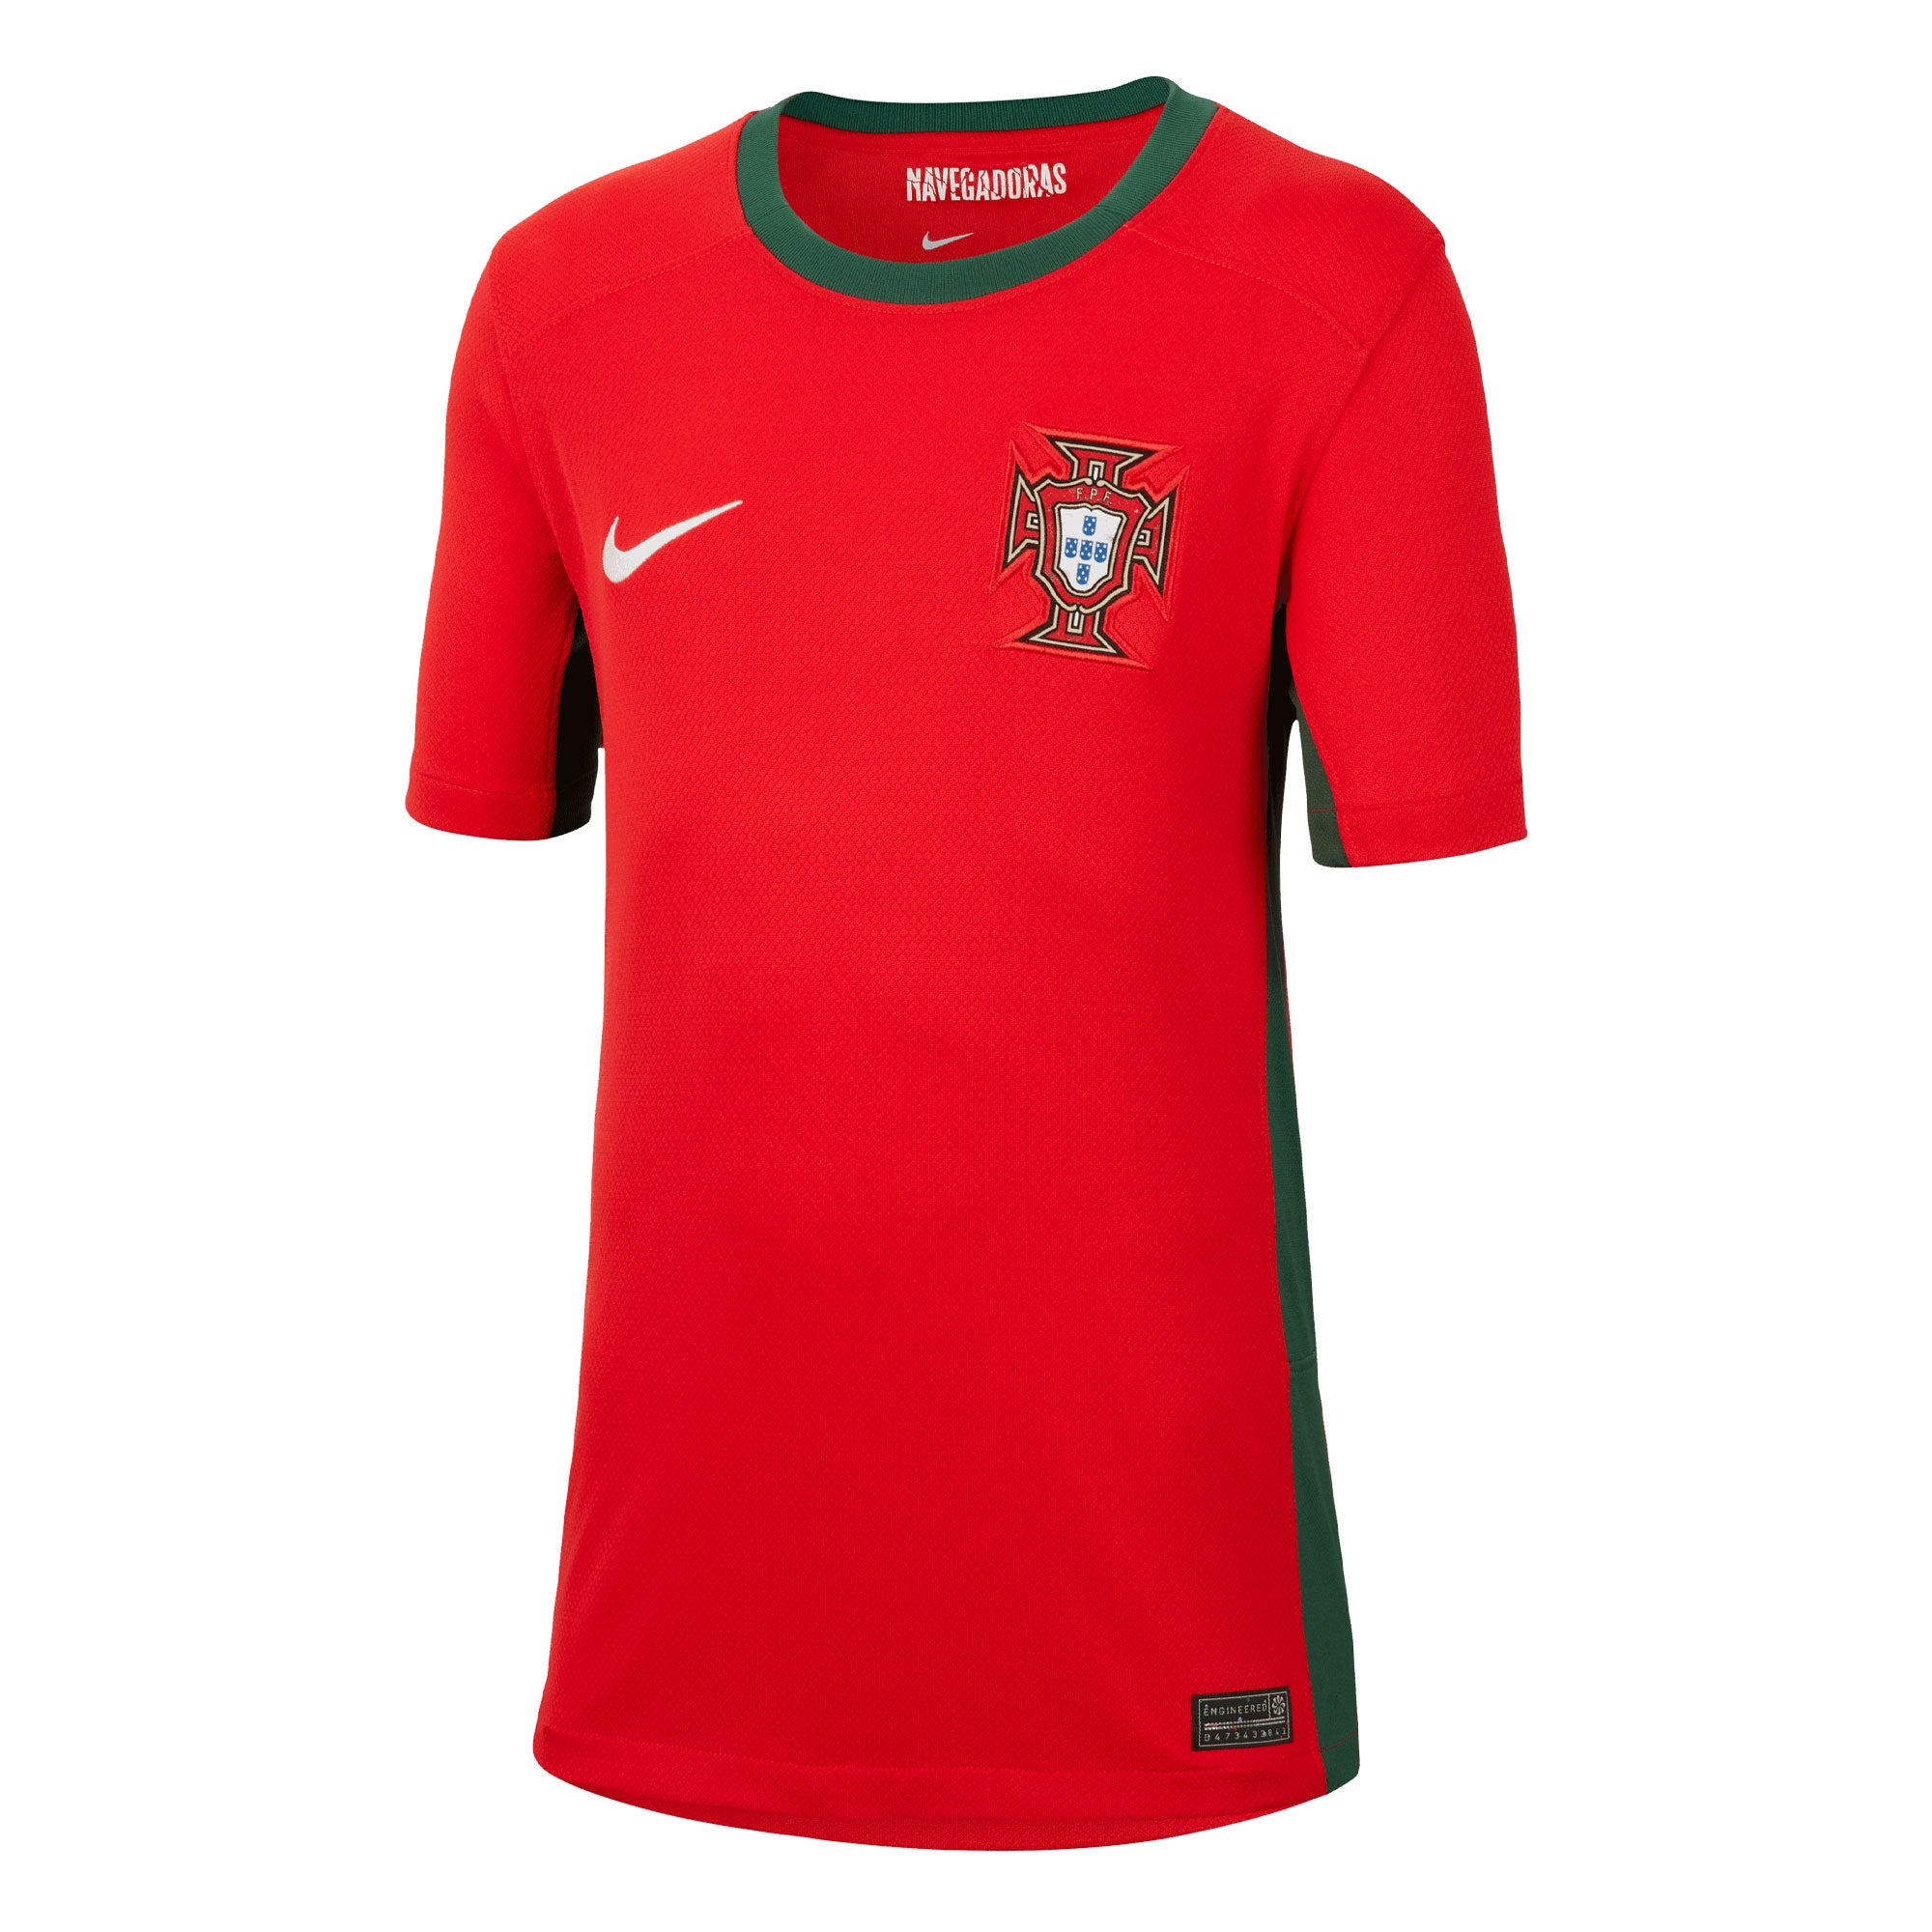 Nike Youth Portugal 2023 Home Replica Jersey, Boys', XL, Red